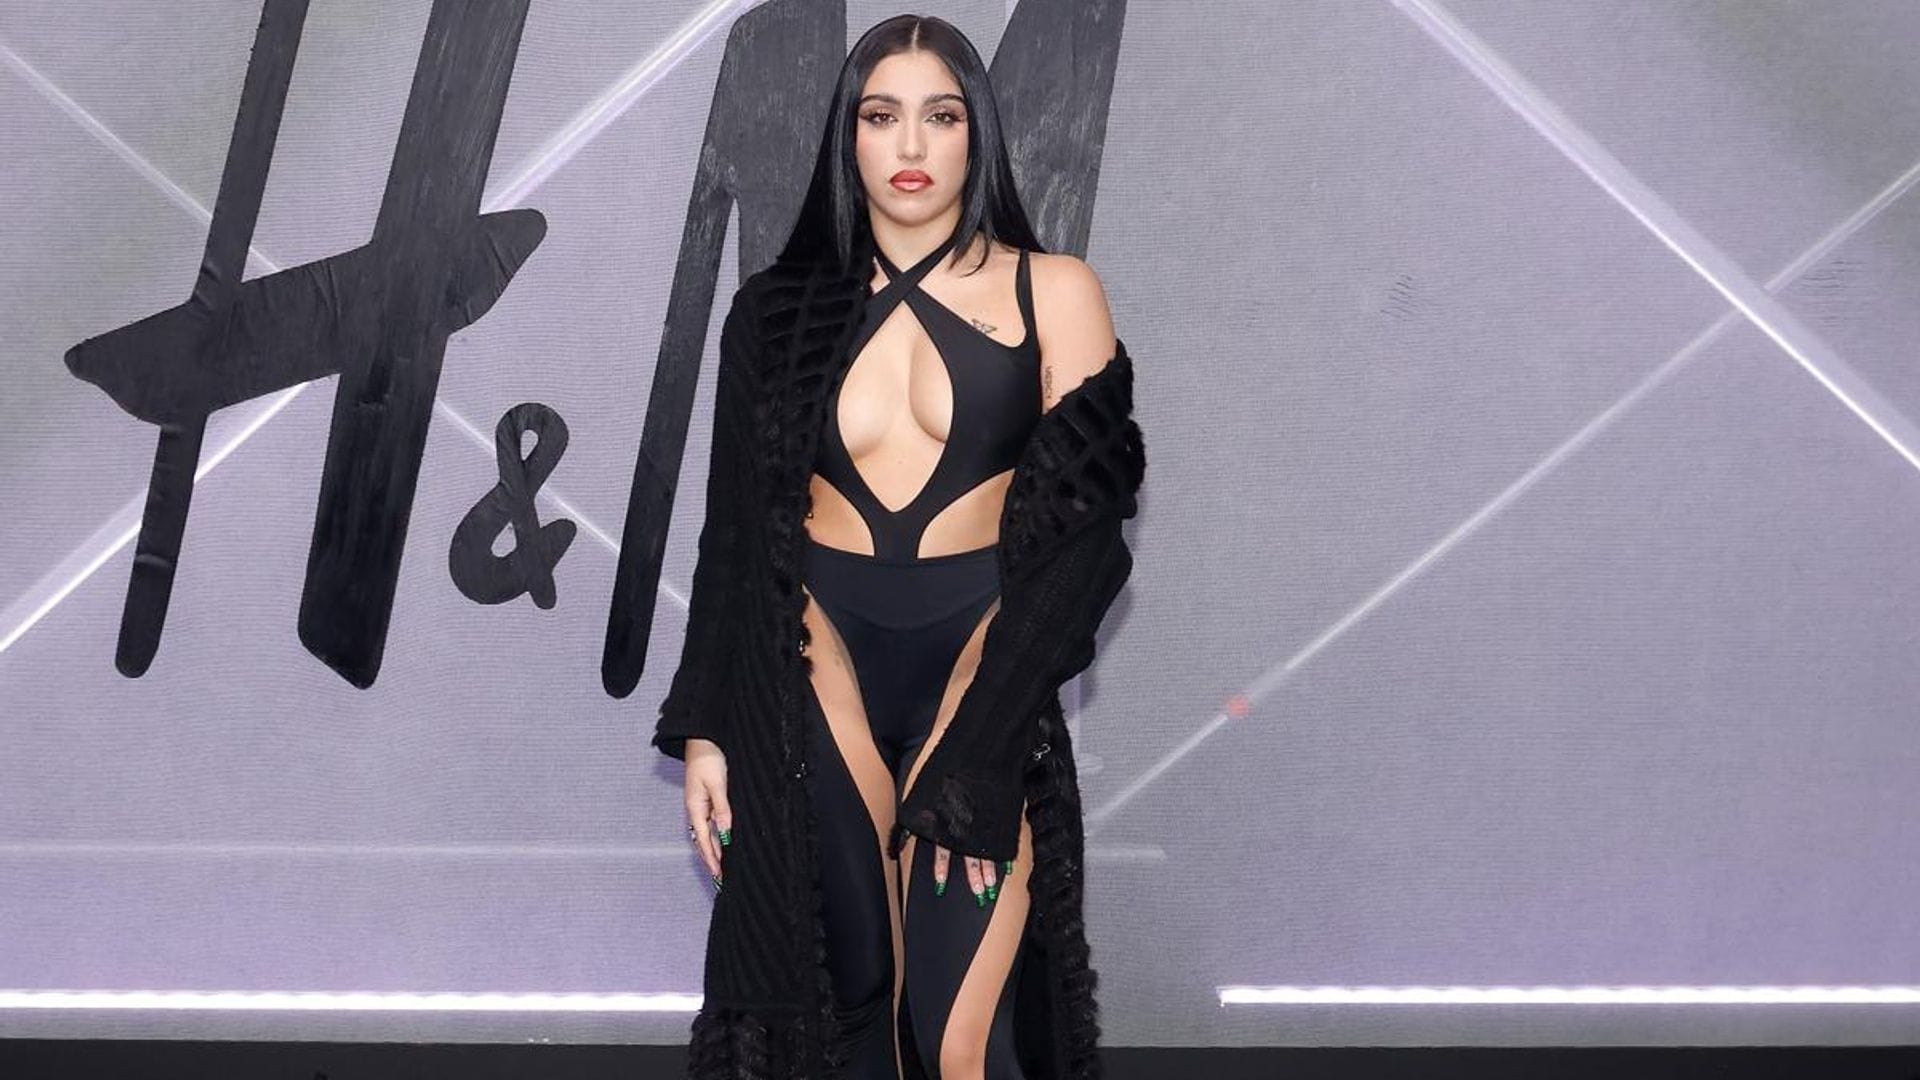 Lourdes Leon thanks her band after raw New Orleans concert